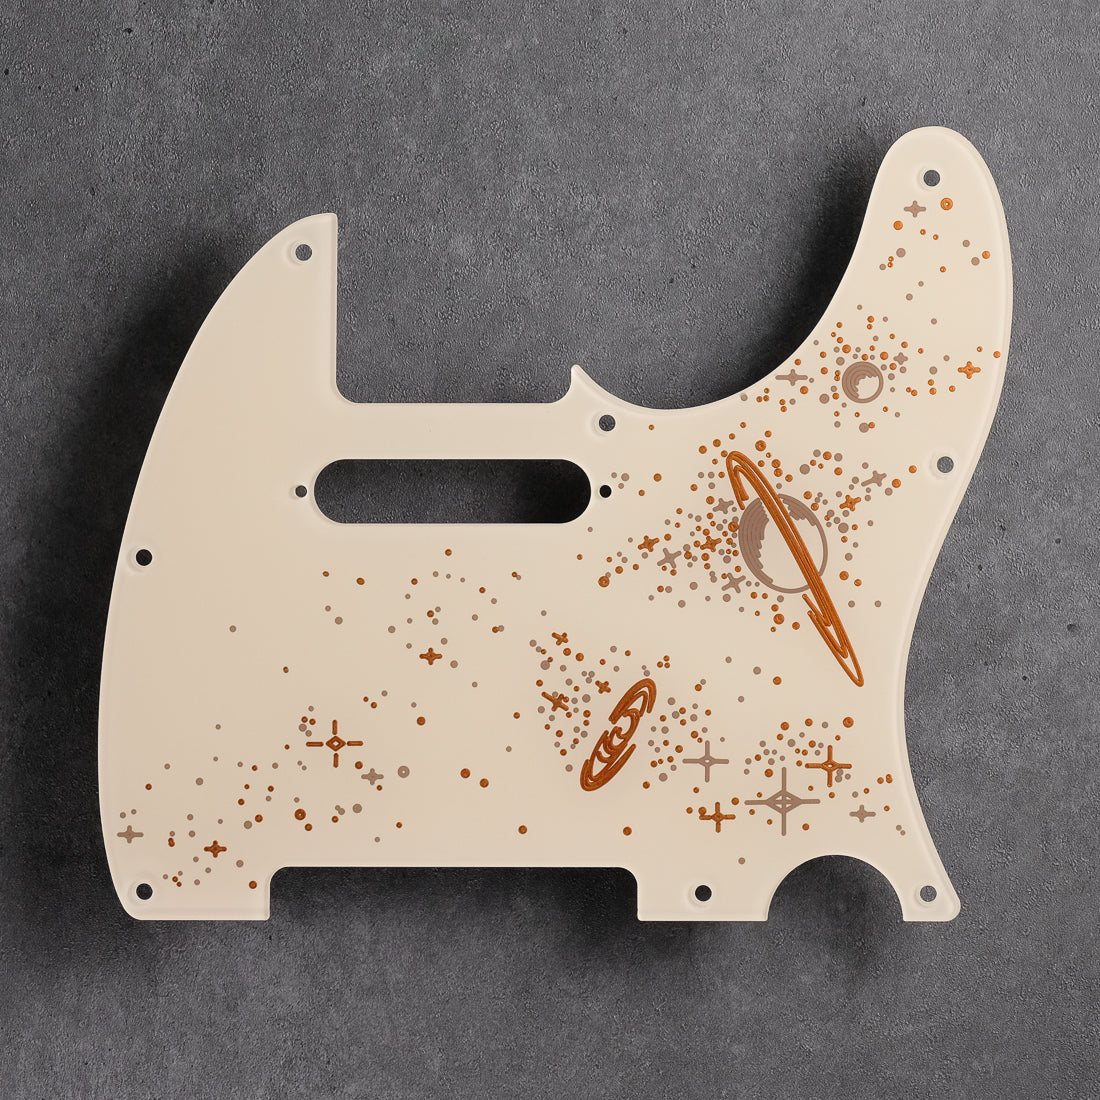 Space Oddity - Telecaster Pickguard - in Ivory